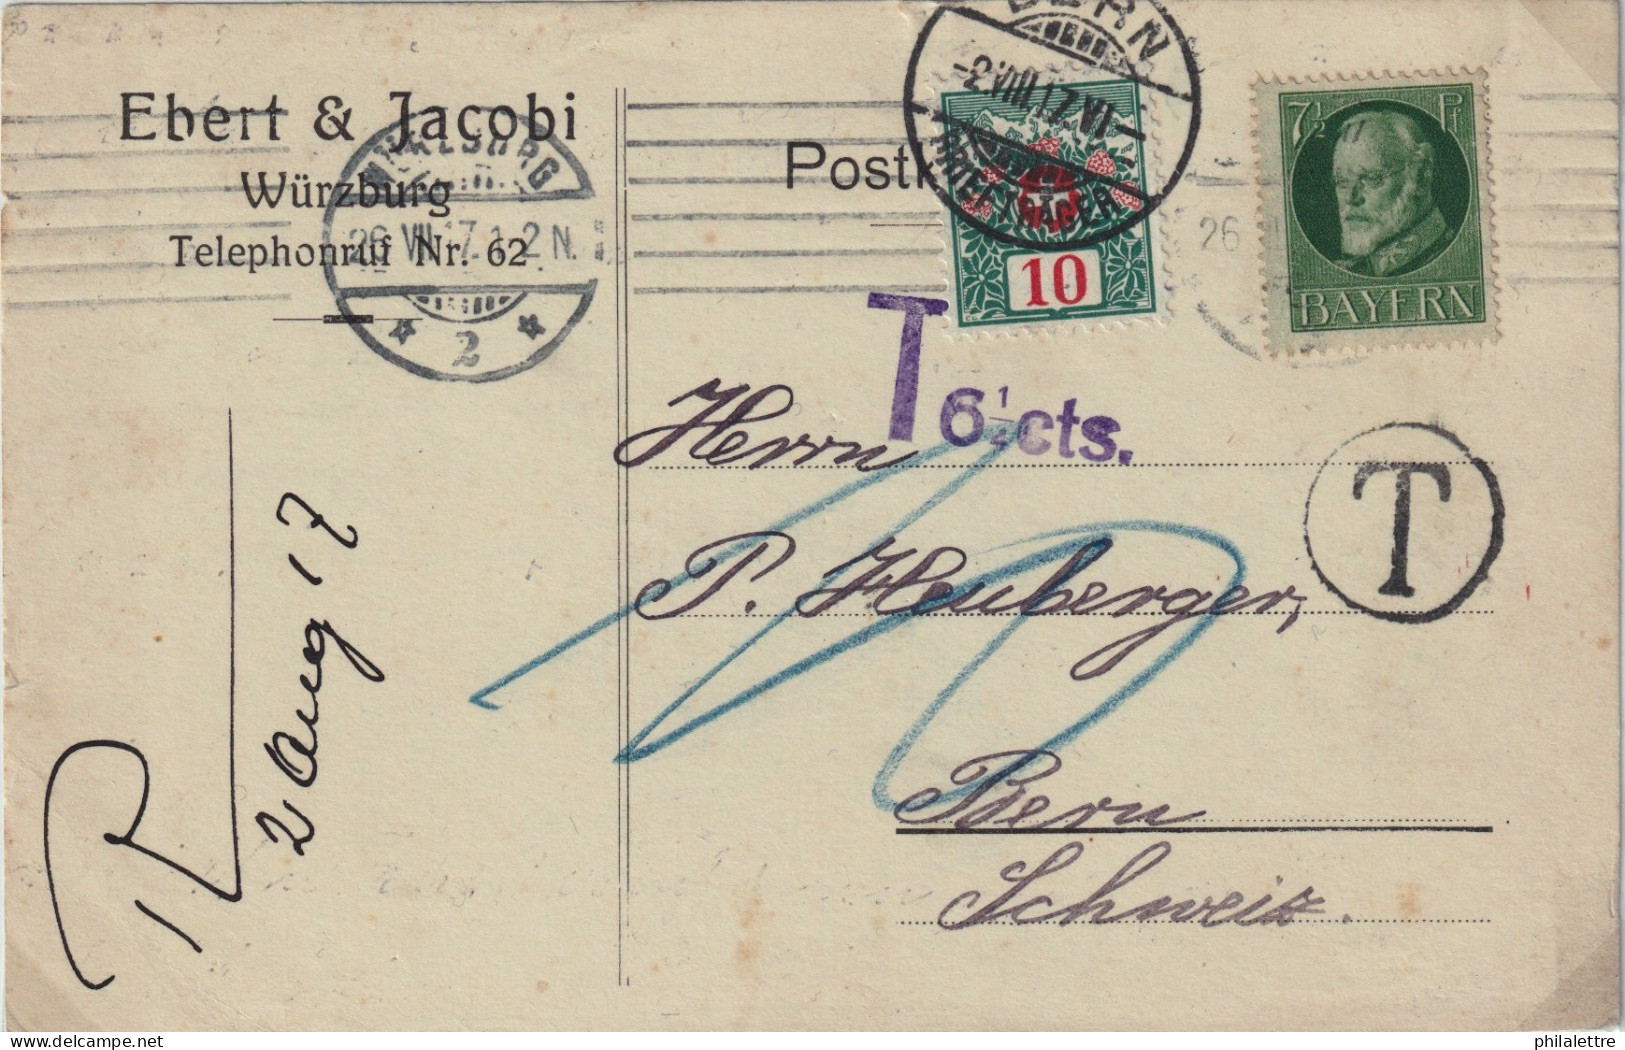 SUISSE / SWITZERLAND 1928 P. Due Mi.32 On PPC From BAVARIA Franked 7-1/2pf With "T 6-1/4cts" Postage Due Mark - Portomarken